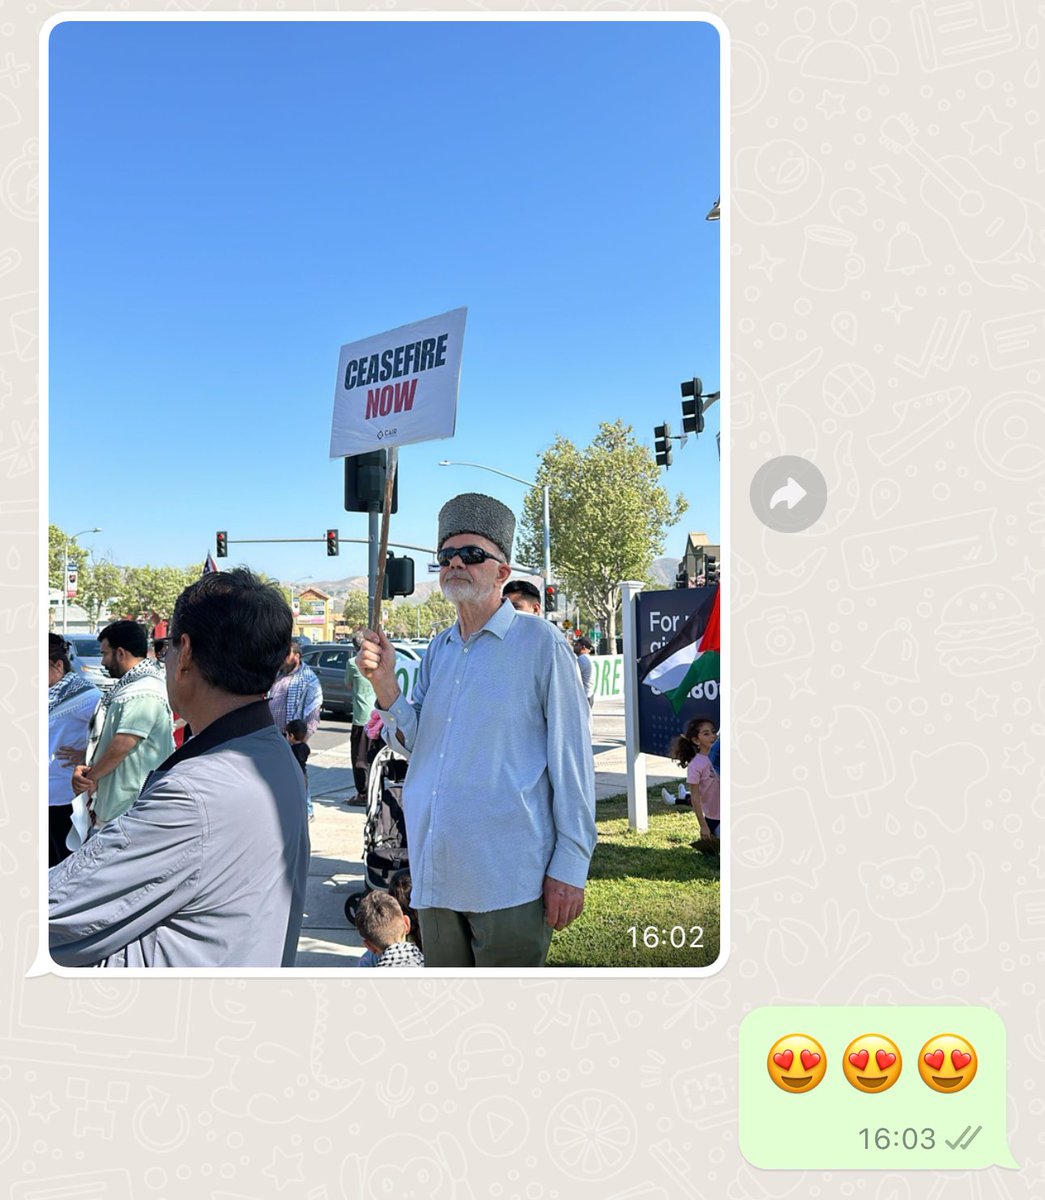 People always sending me pictures of my dad going to protests alone. He said if the youth are risking everything then we have no excuse to not show up.